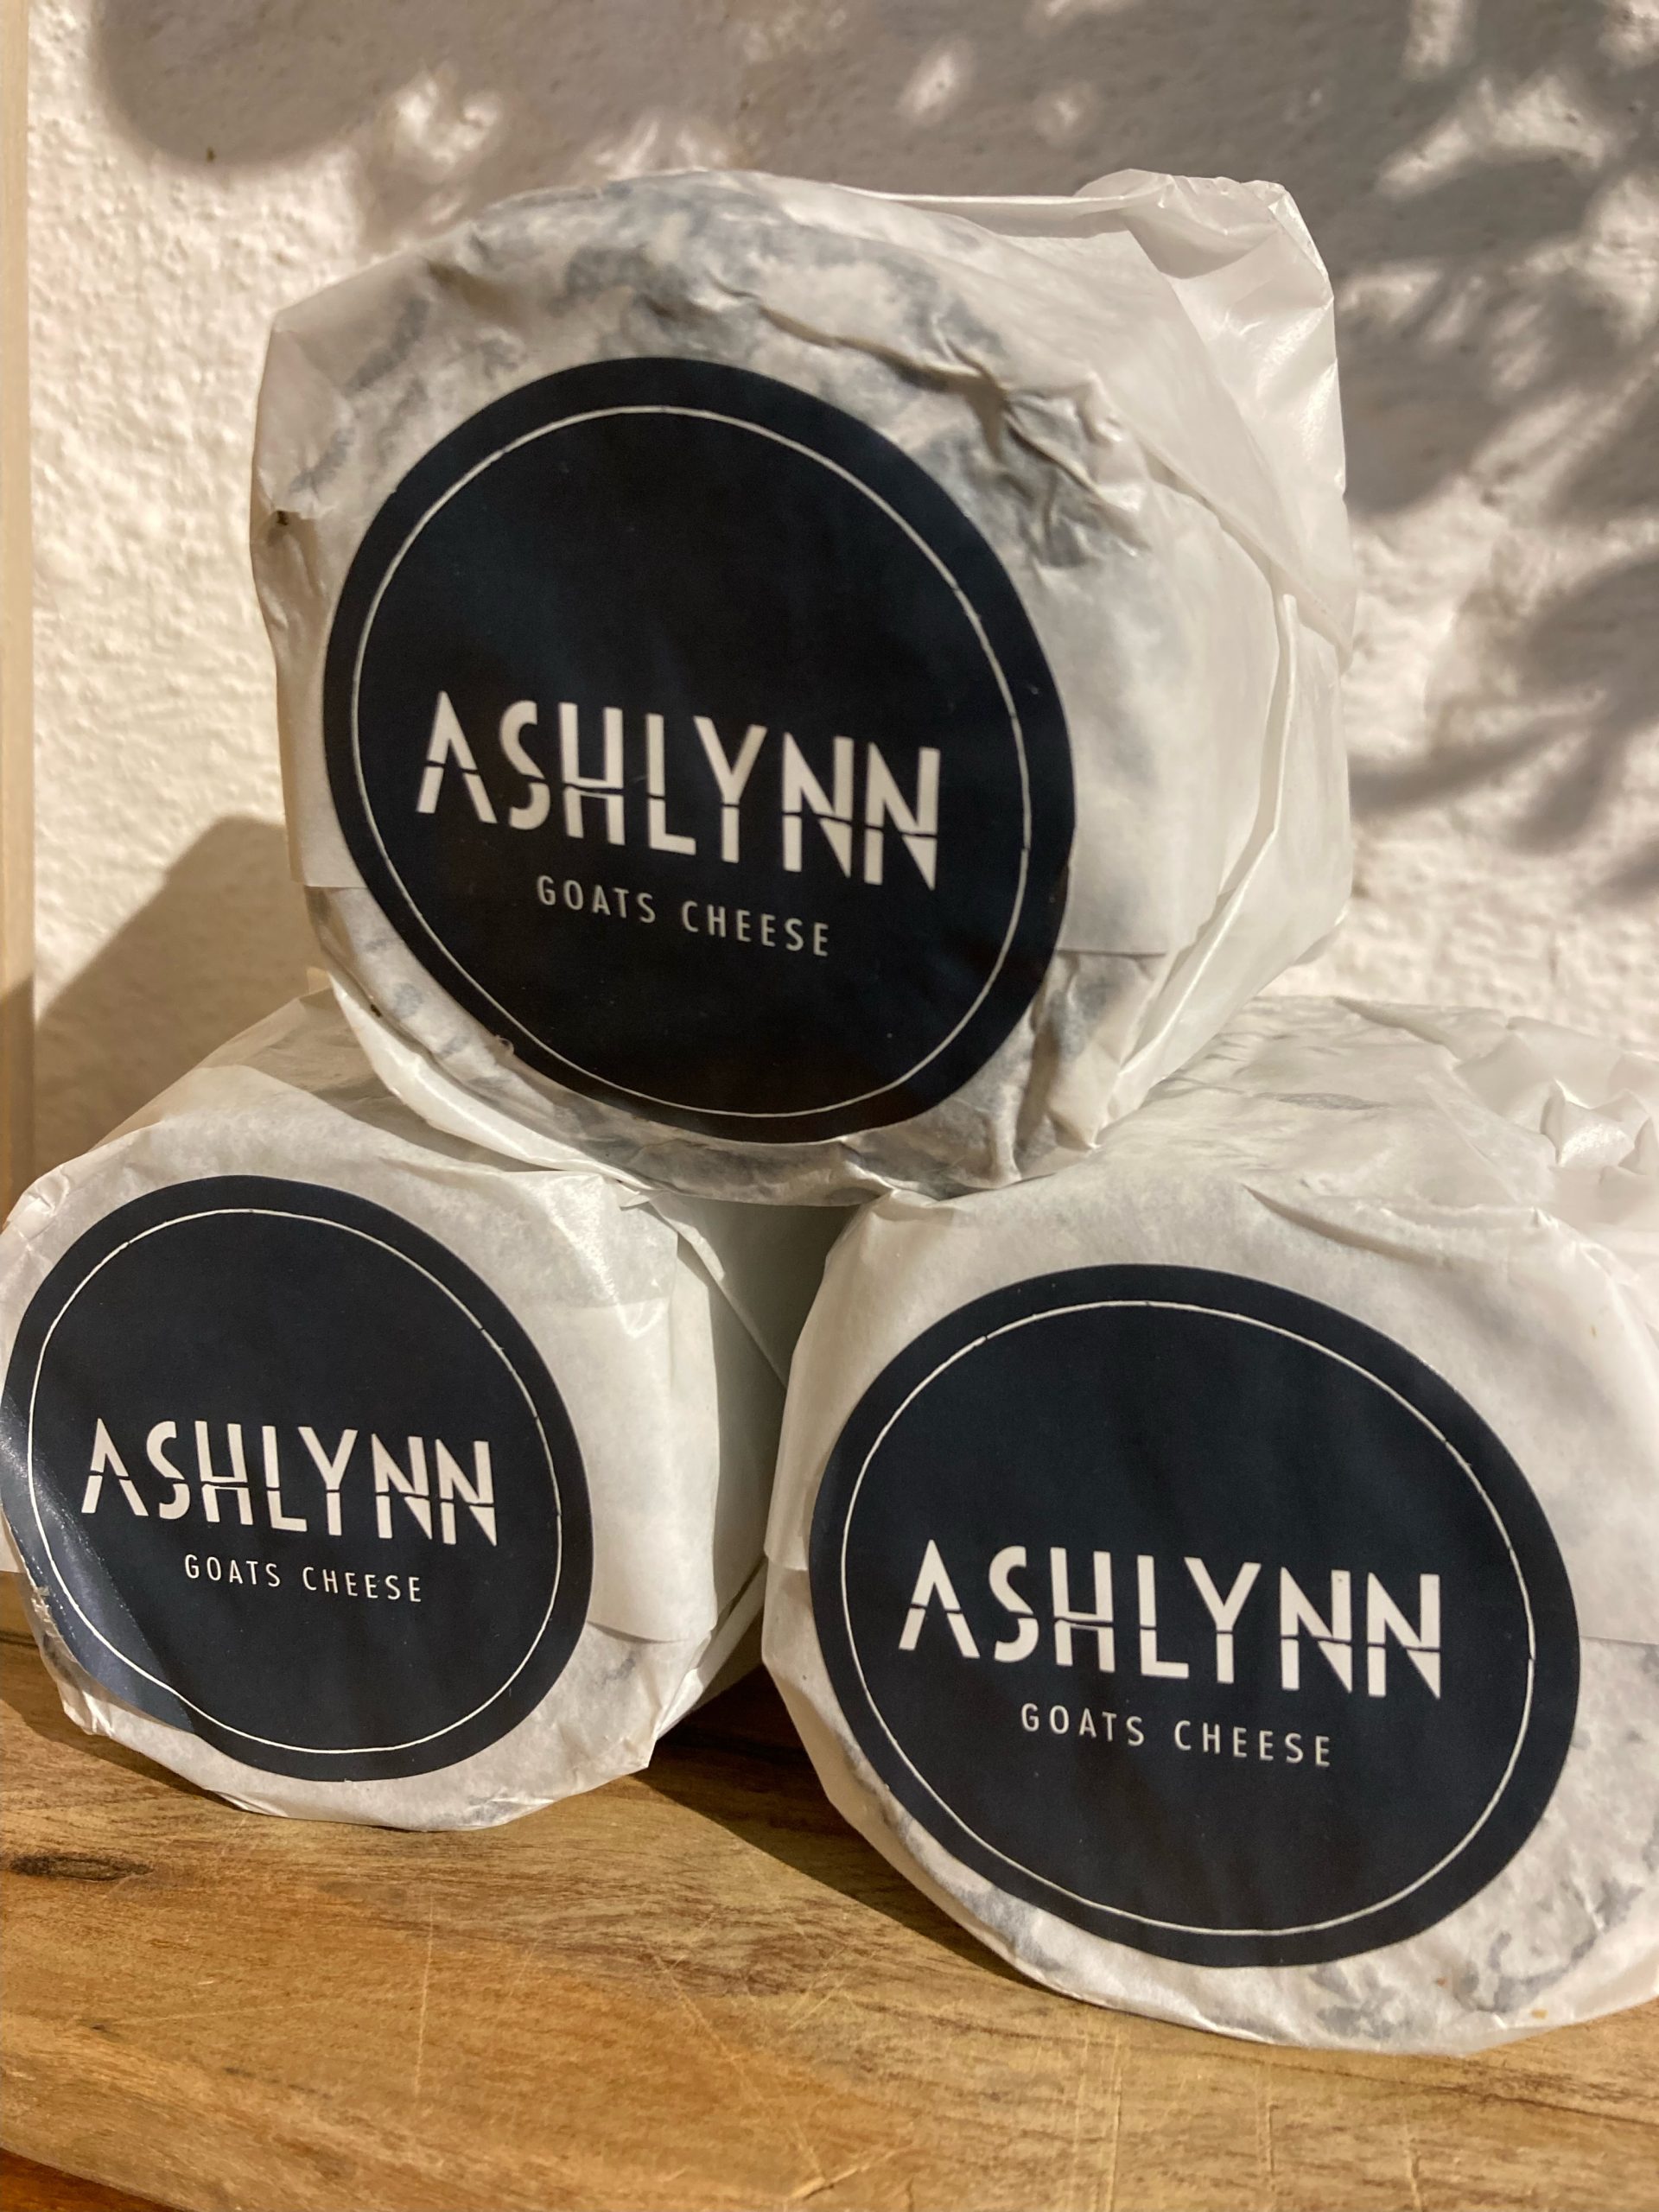 3 Ashlynn Goats cheeses stacked in a pyramid